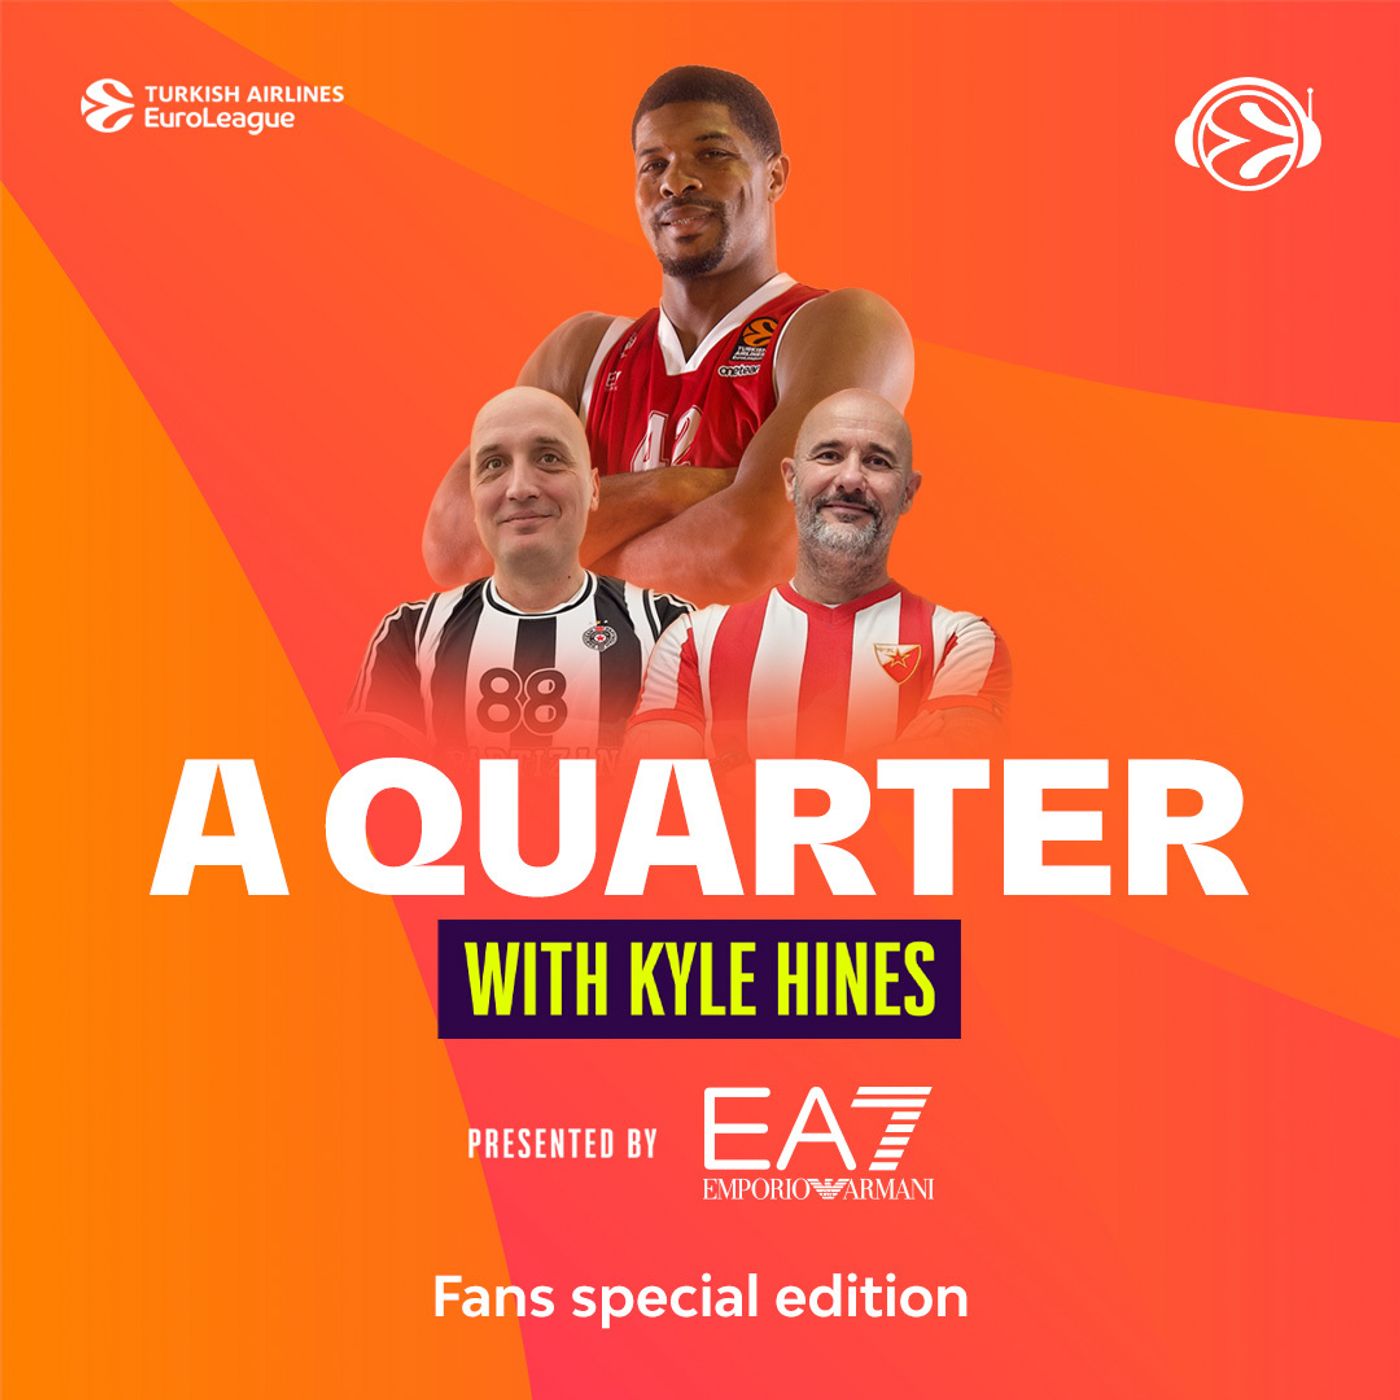 S5 Ep4: A Quarter with Kyle Hines and the Fans